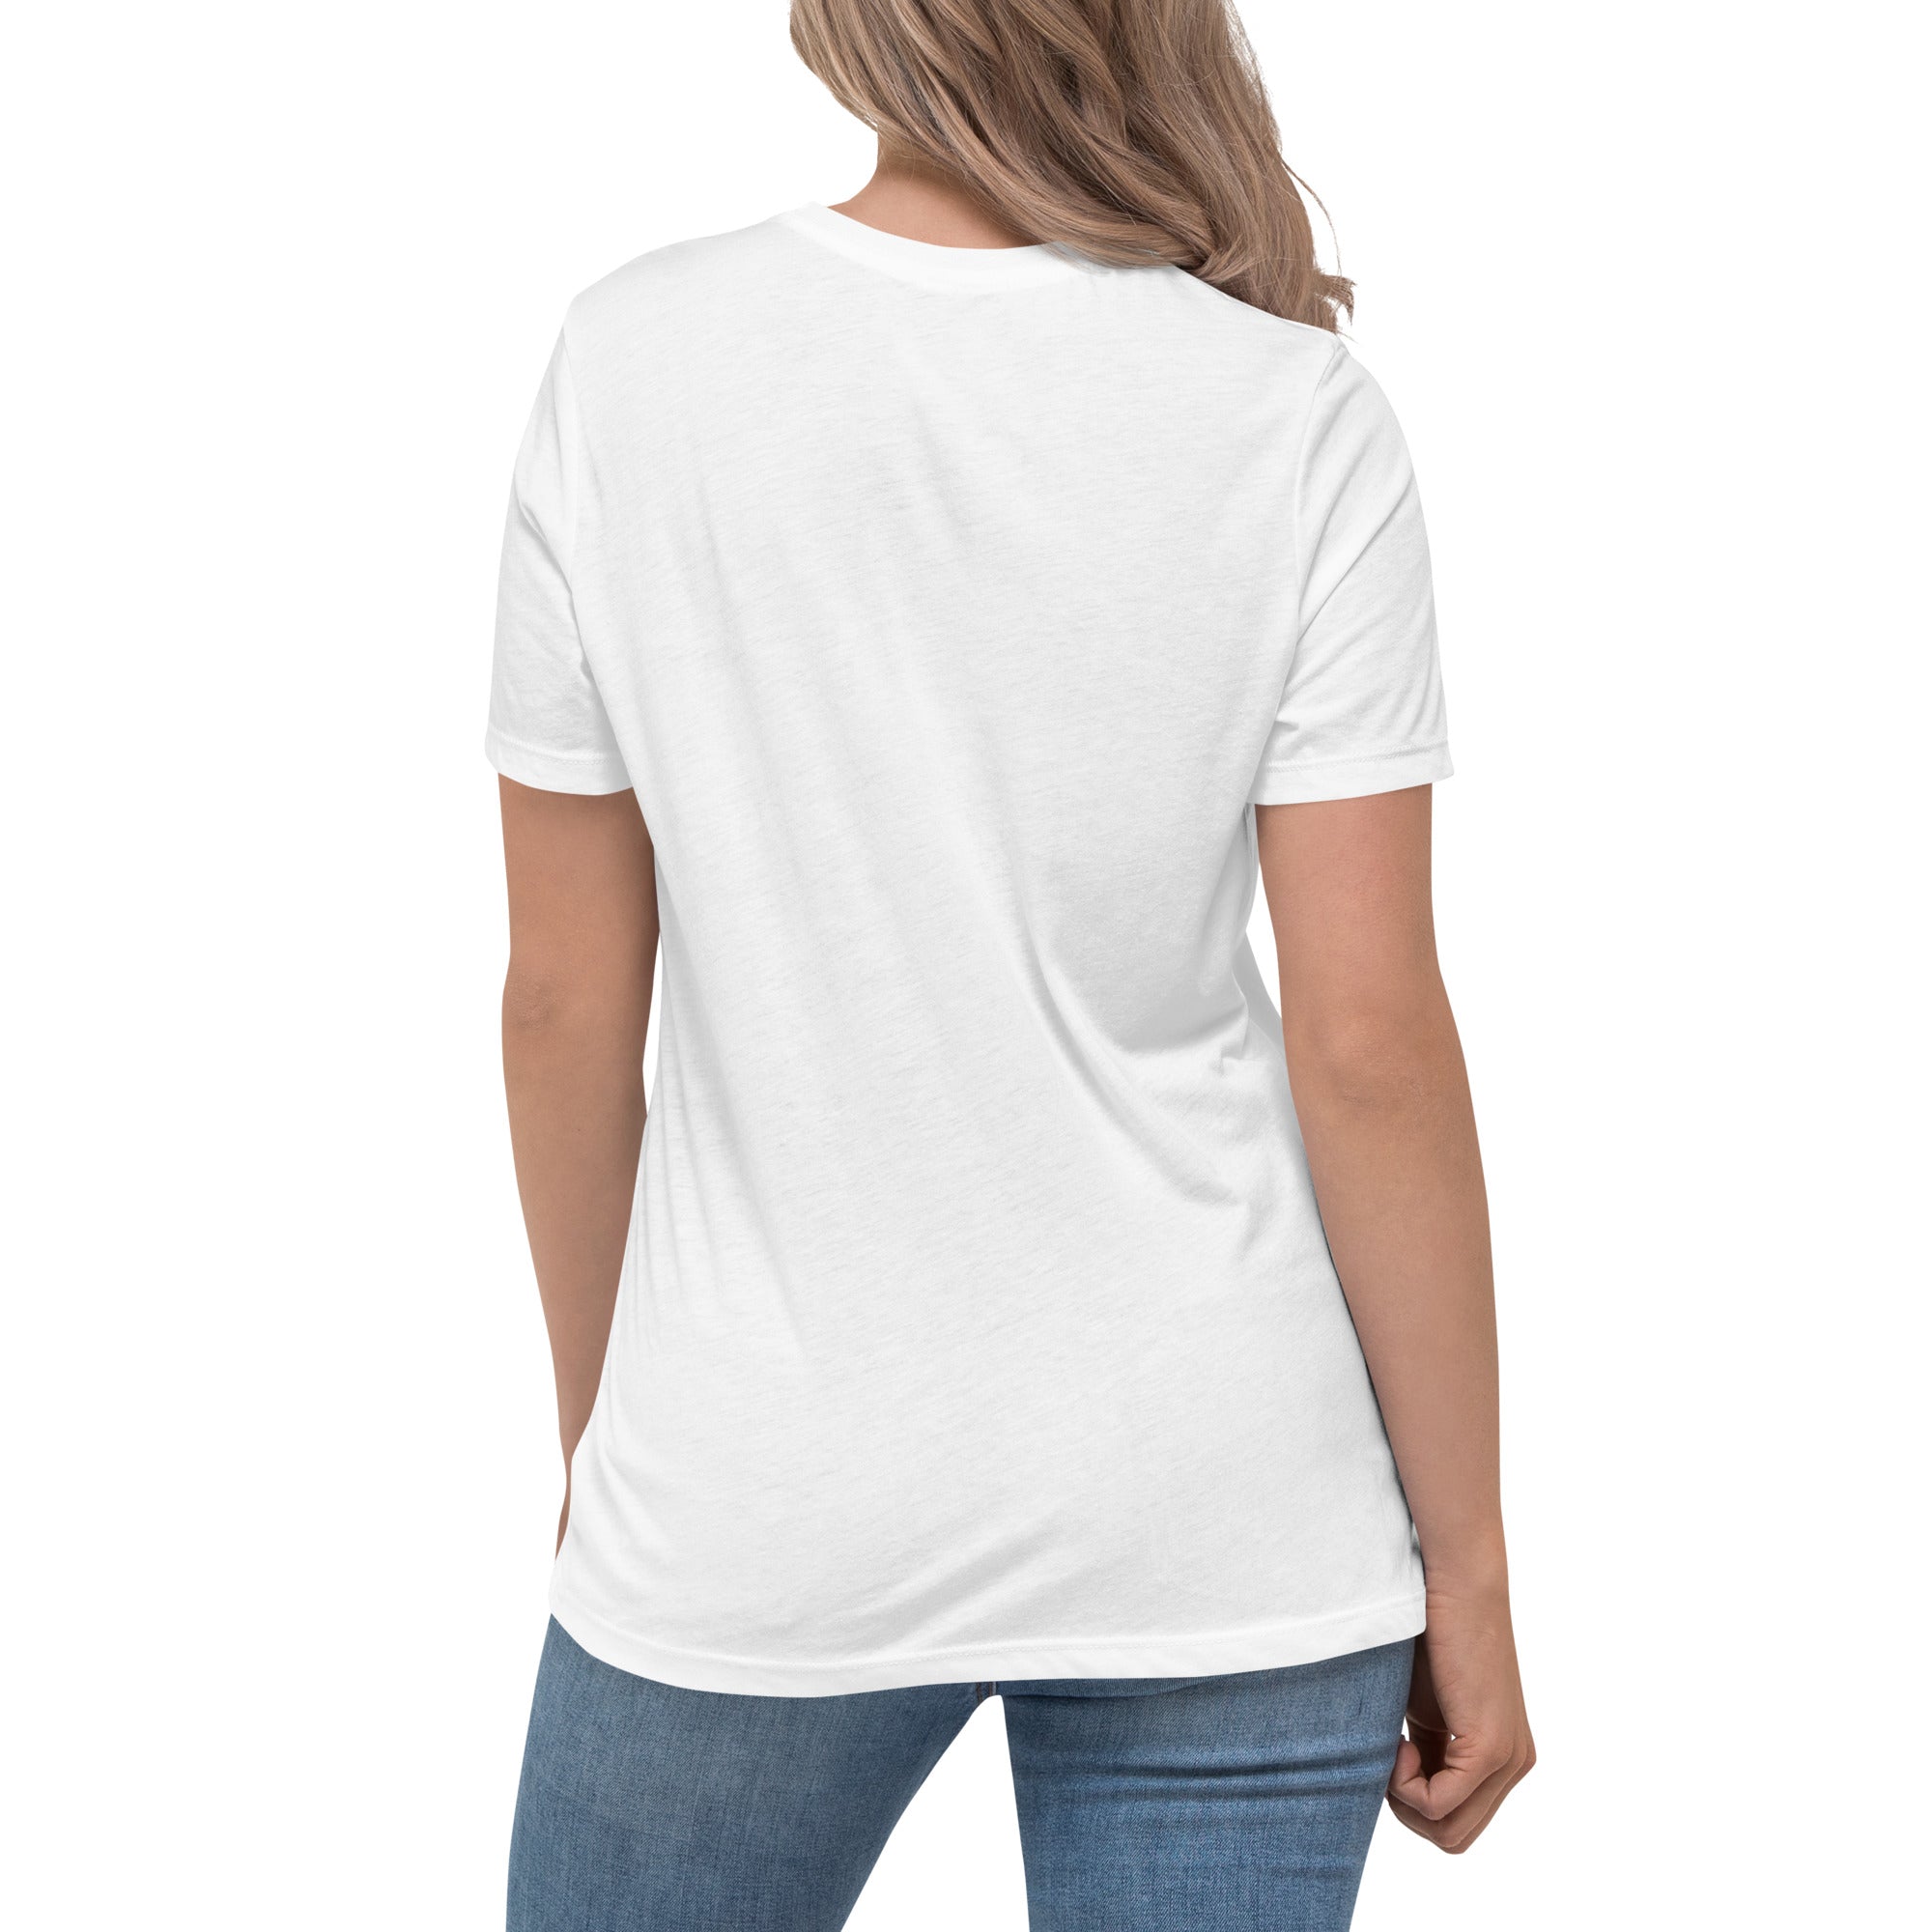 Liberty and Justice Women's Relaxed T-Shirt